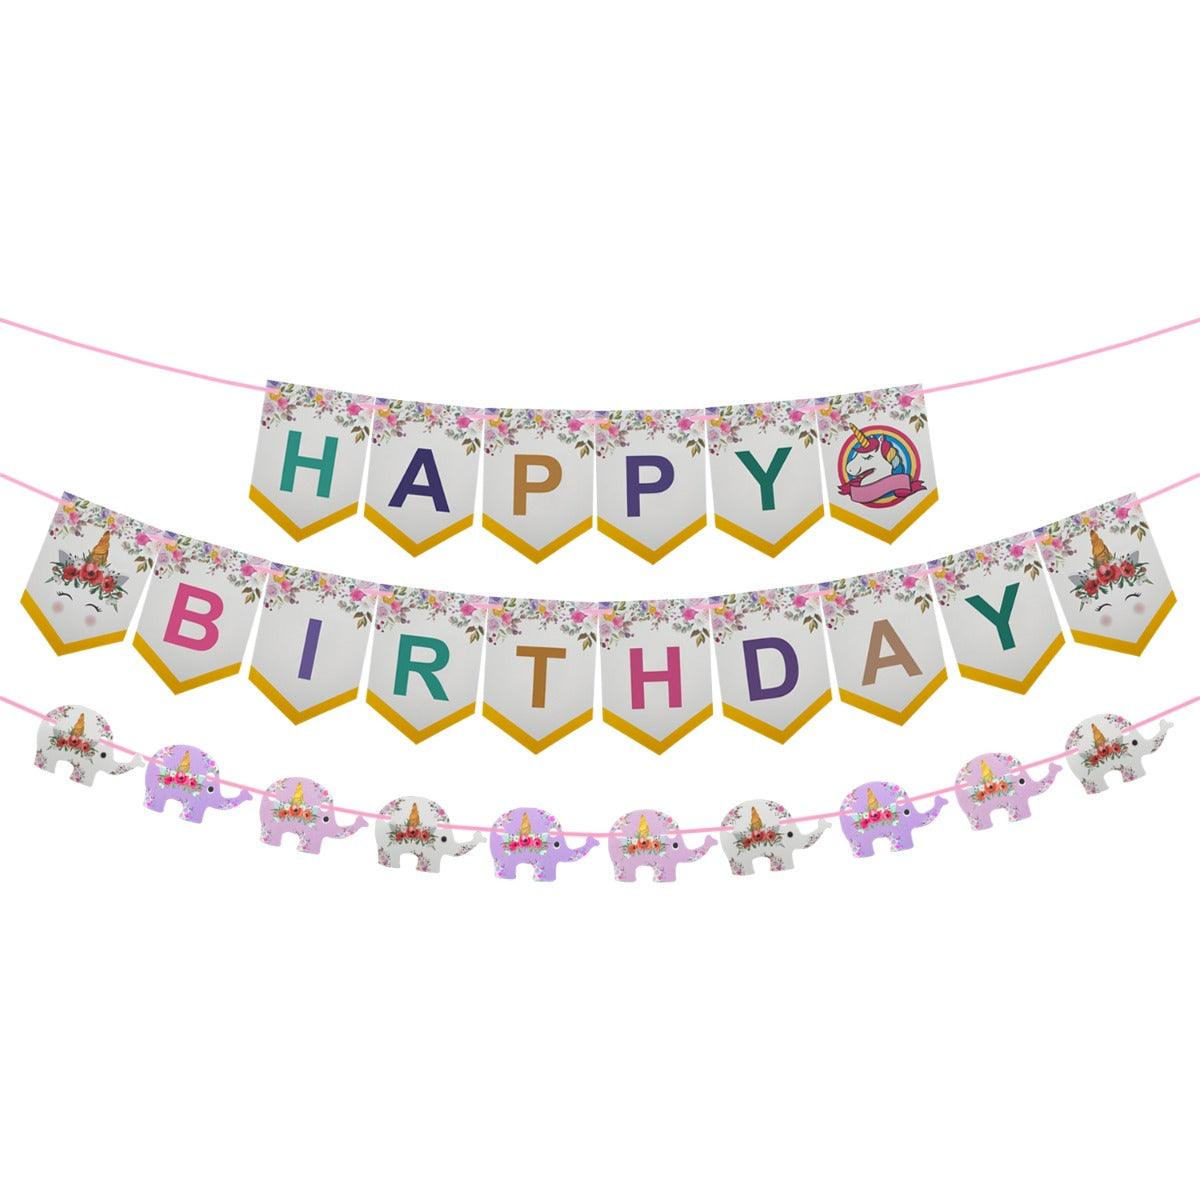 PartyCorp Multicolour Happy Birthday Flower Themed Printed With MultiColour Elephant Shaped Garland Wall Banner Decoration Set